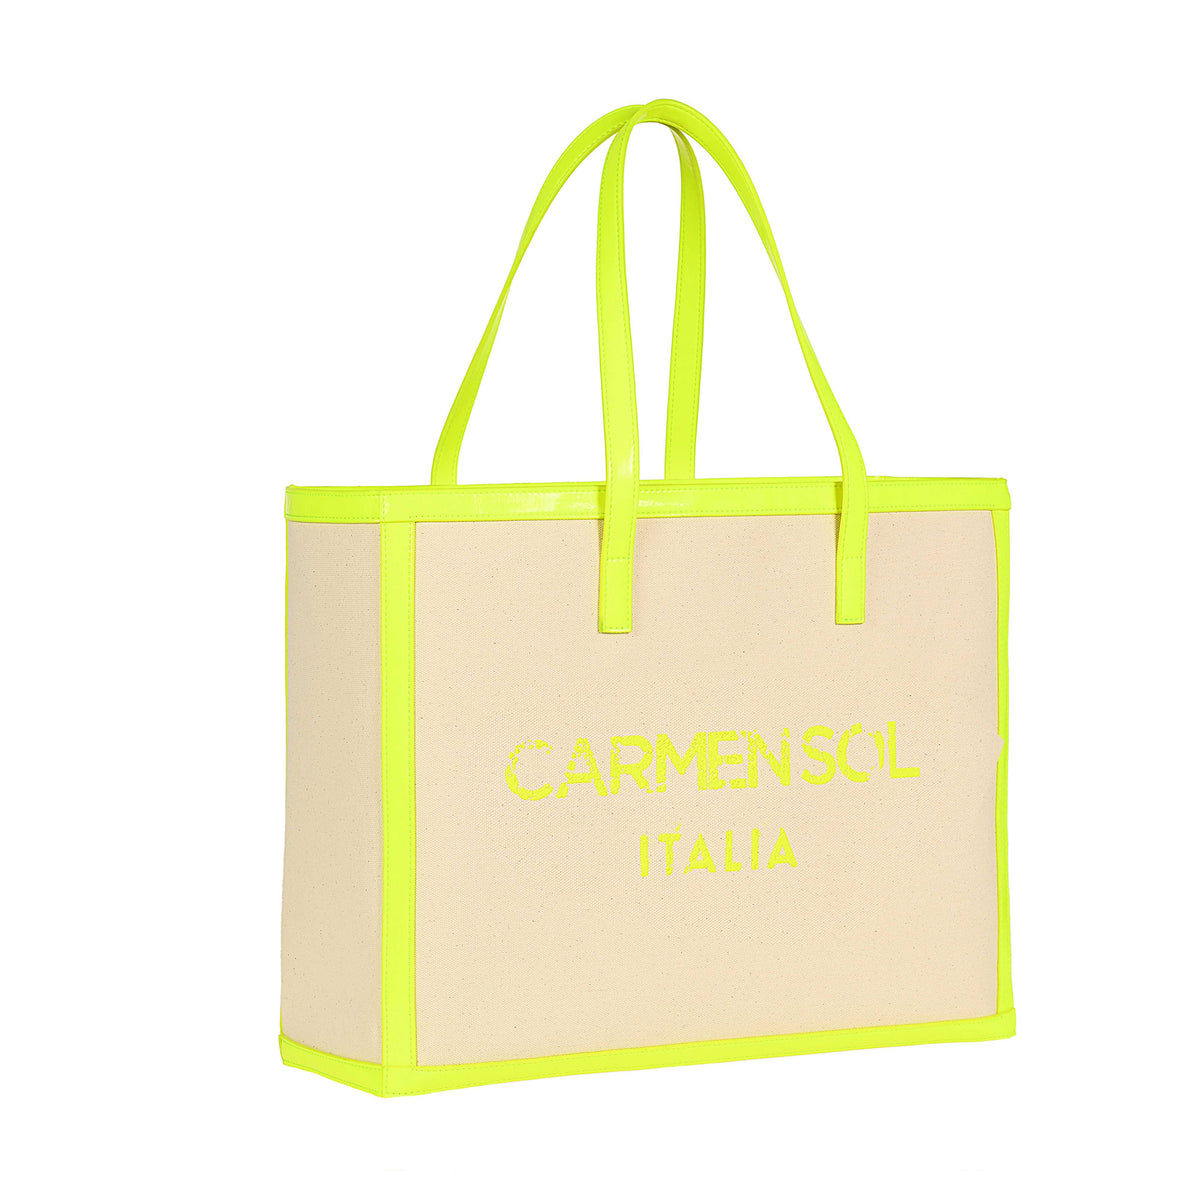 Carmen Sol neon yellow large tote bags made from vegan canvas